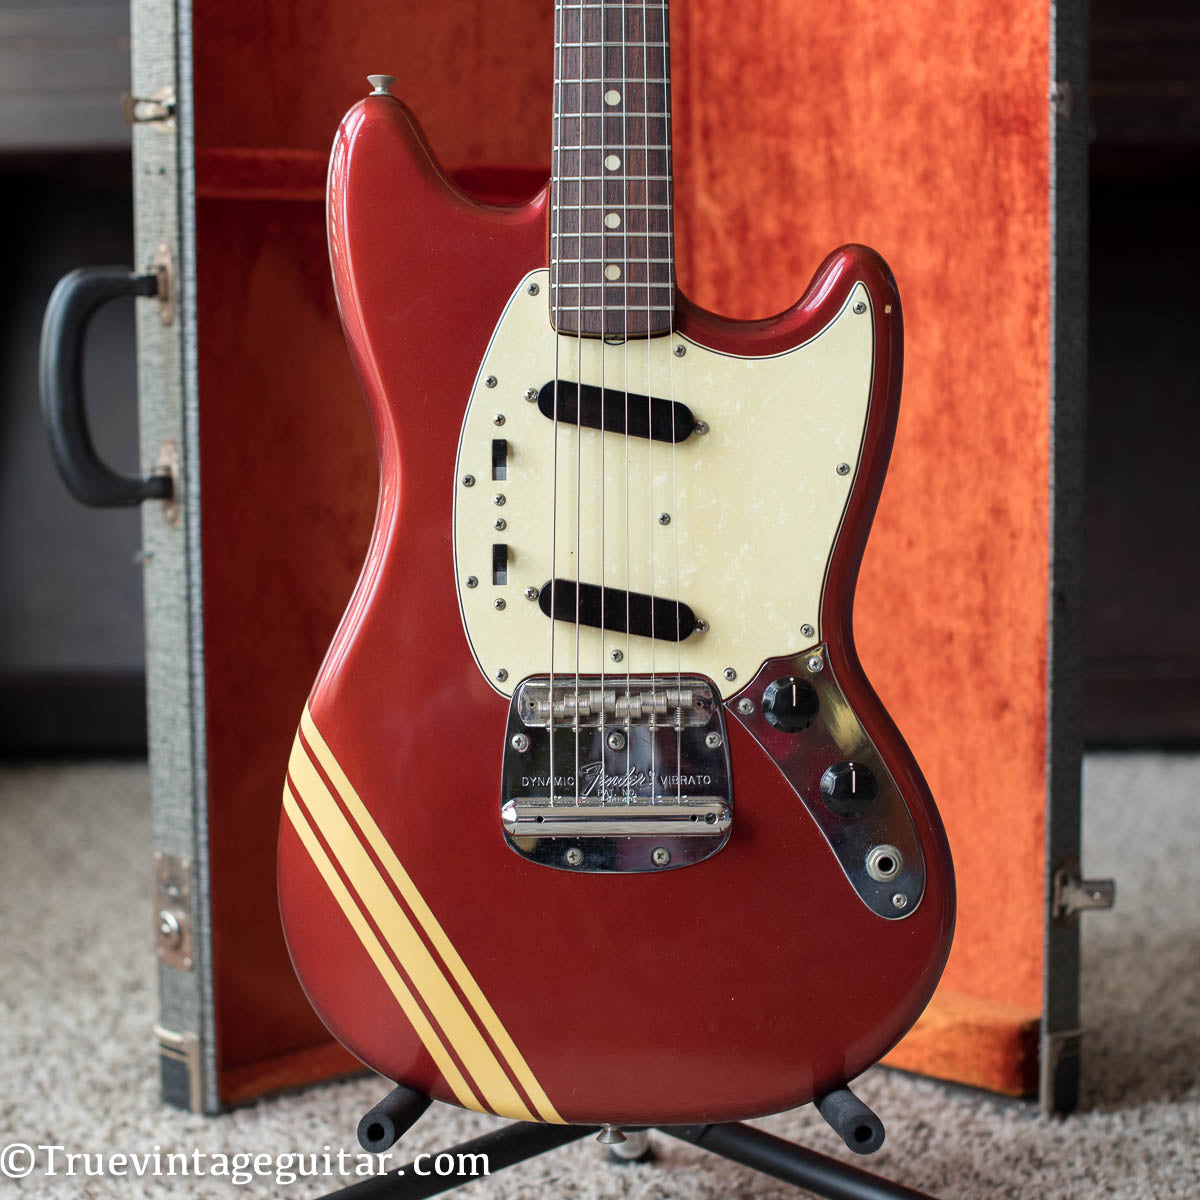 Vintage 1970 Fender Mustang Competition Red electric guitar